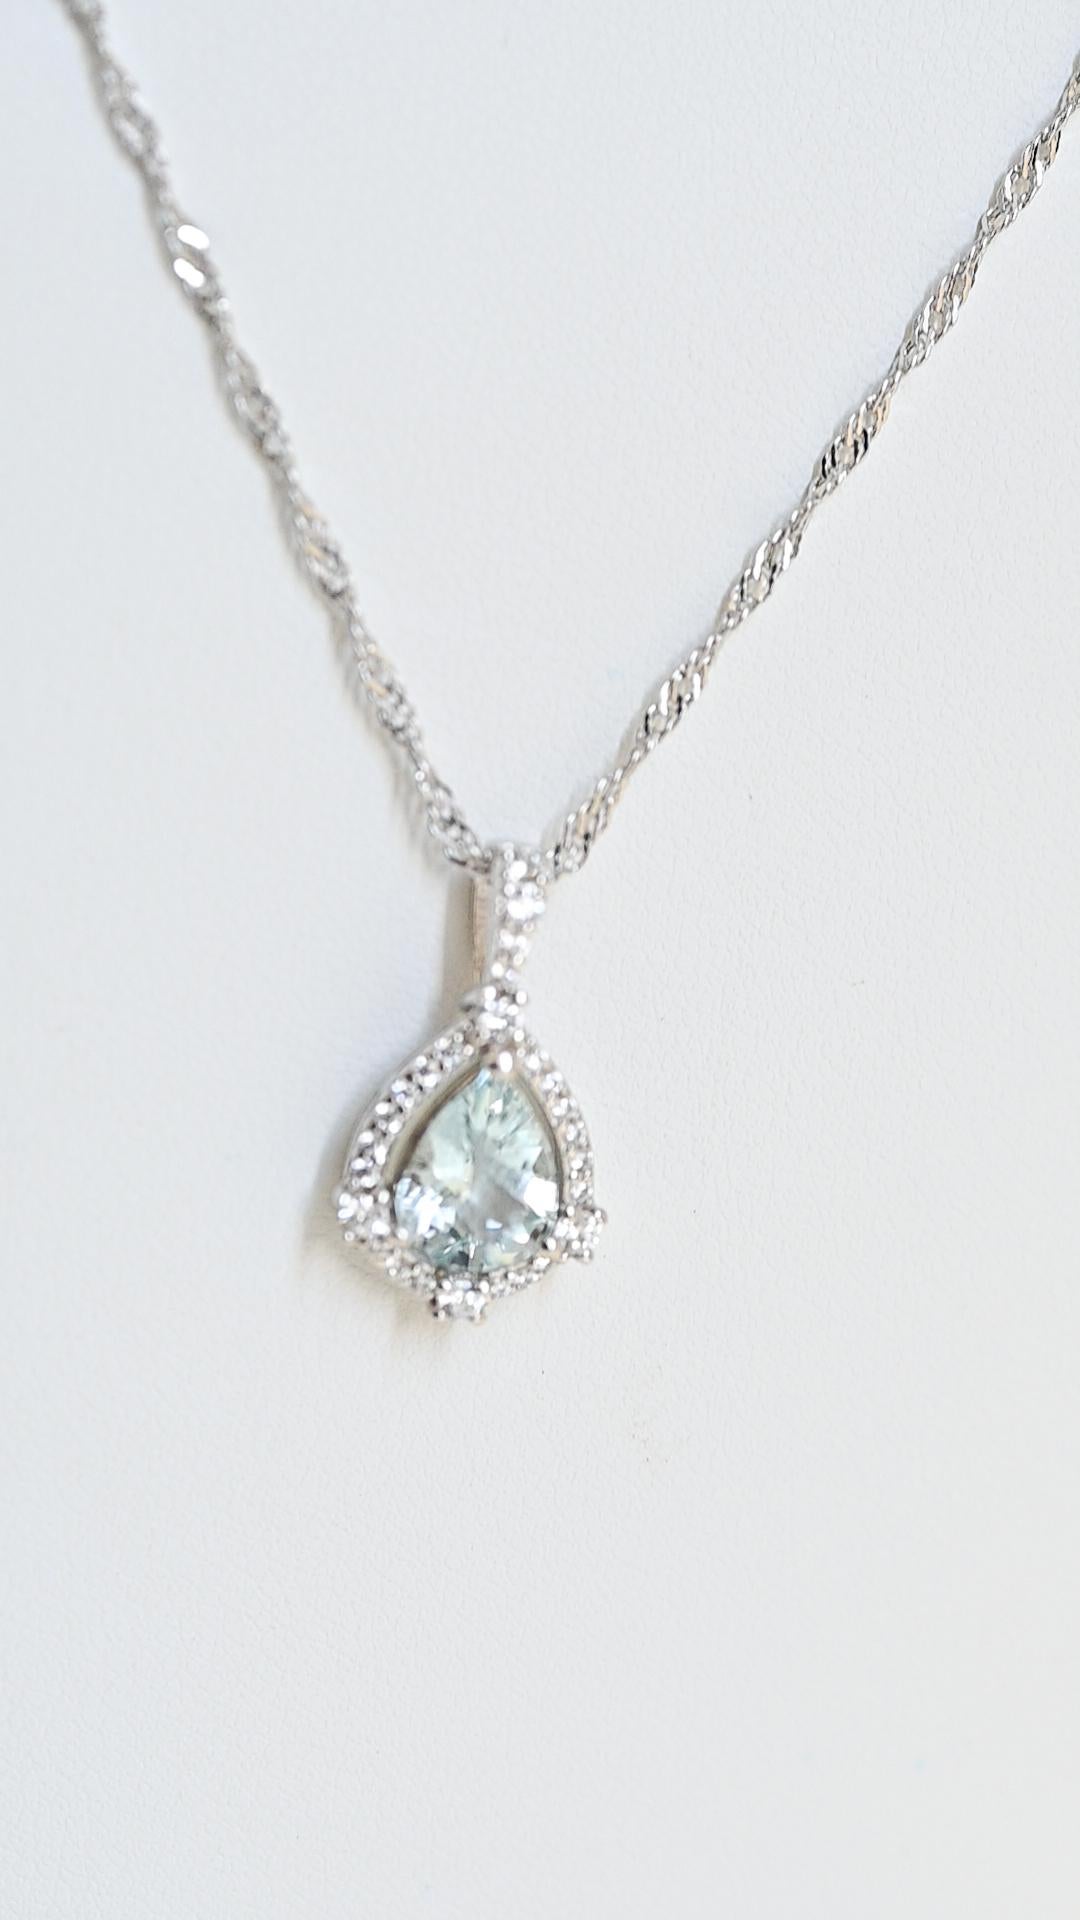 Taille poire 2.10 Cts Aquamarine Bridal Wedding Pendant Necklace Sterling Silver Jewelry  en vente